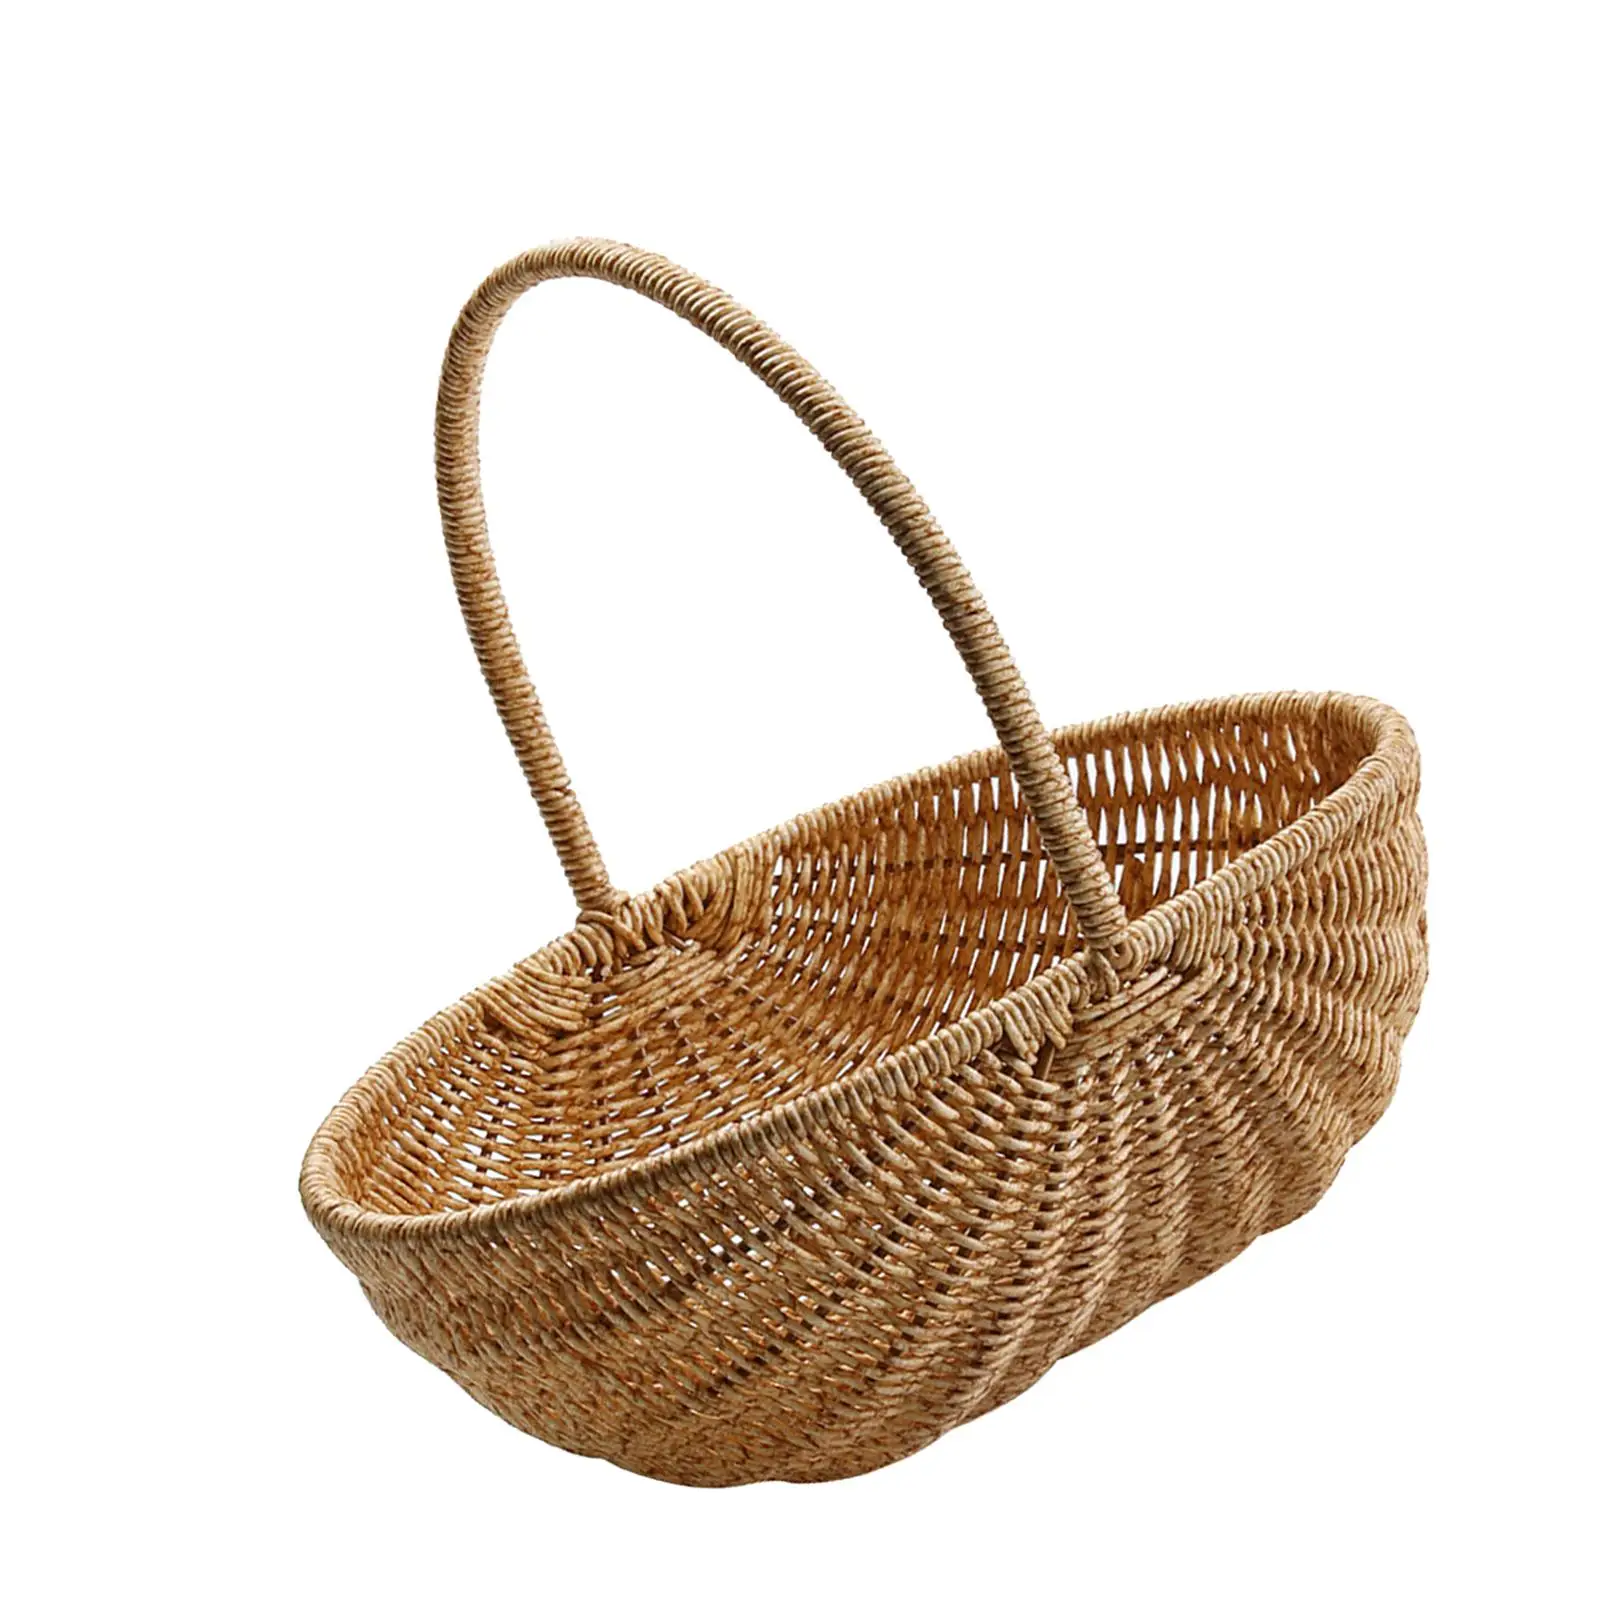 Woven Woven Basket Decoration Organizer Containers Picnic Sundries Fruits